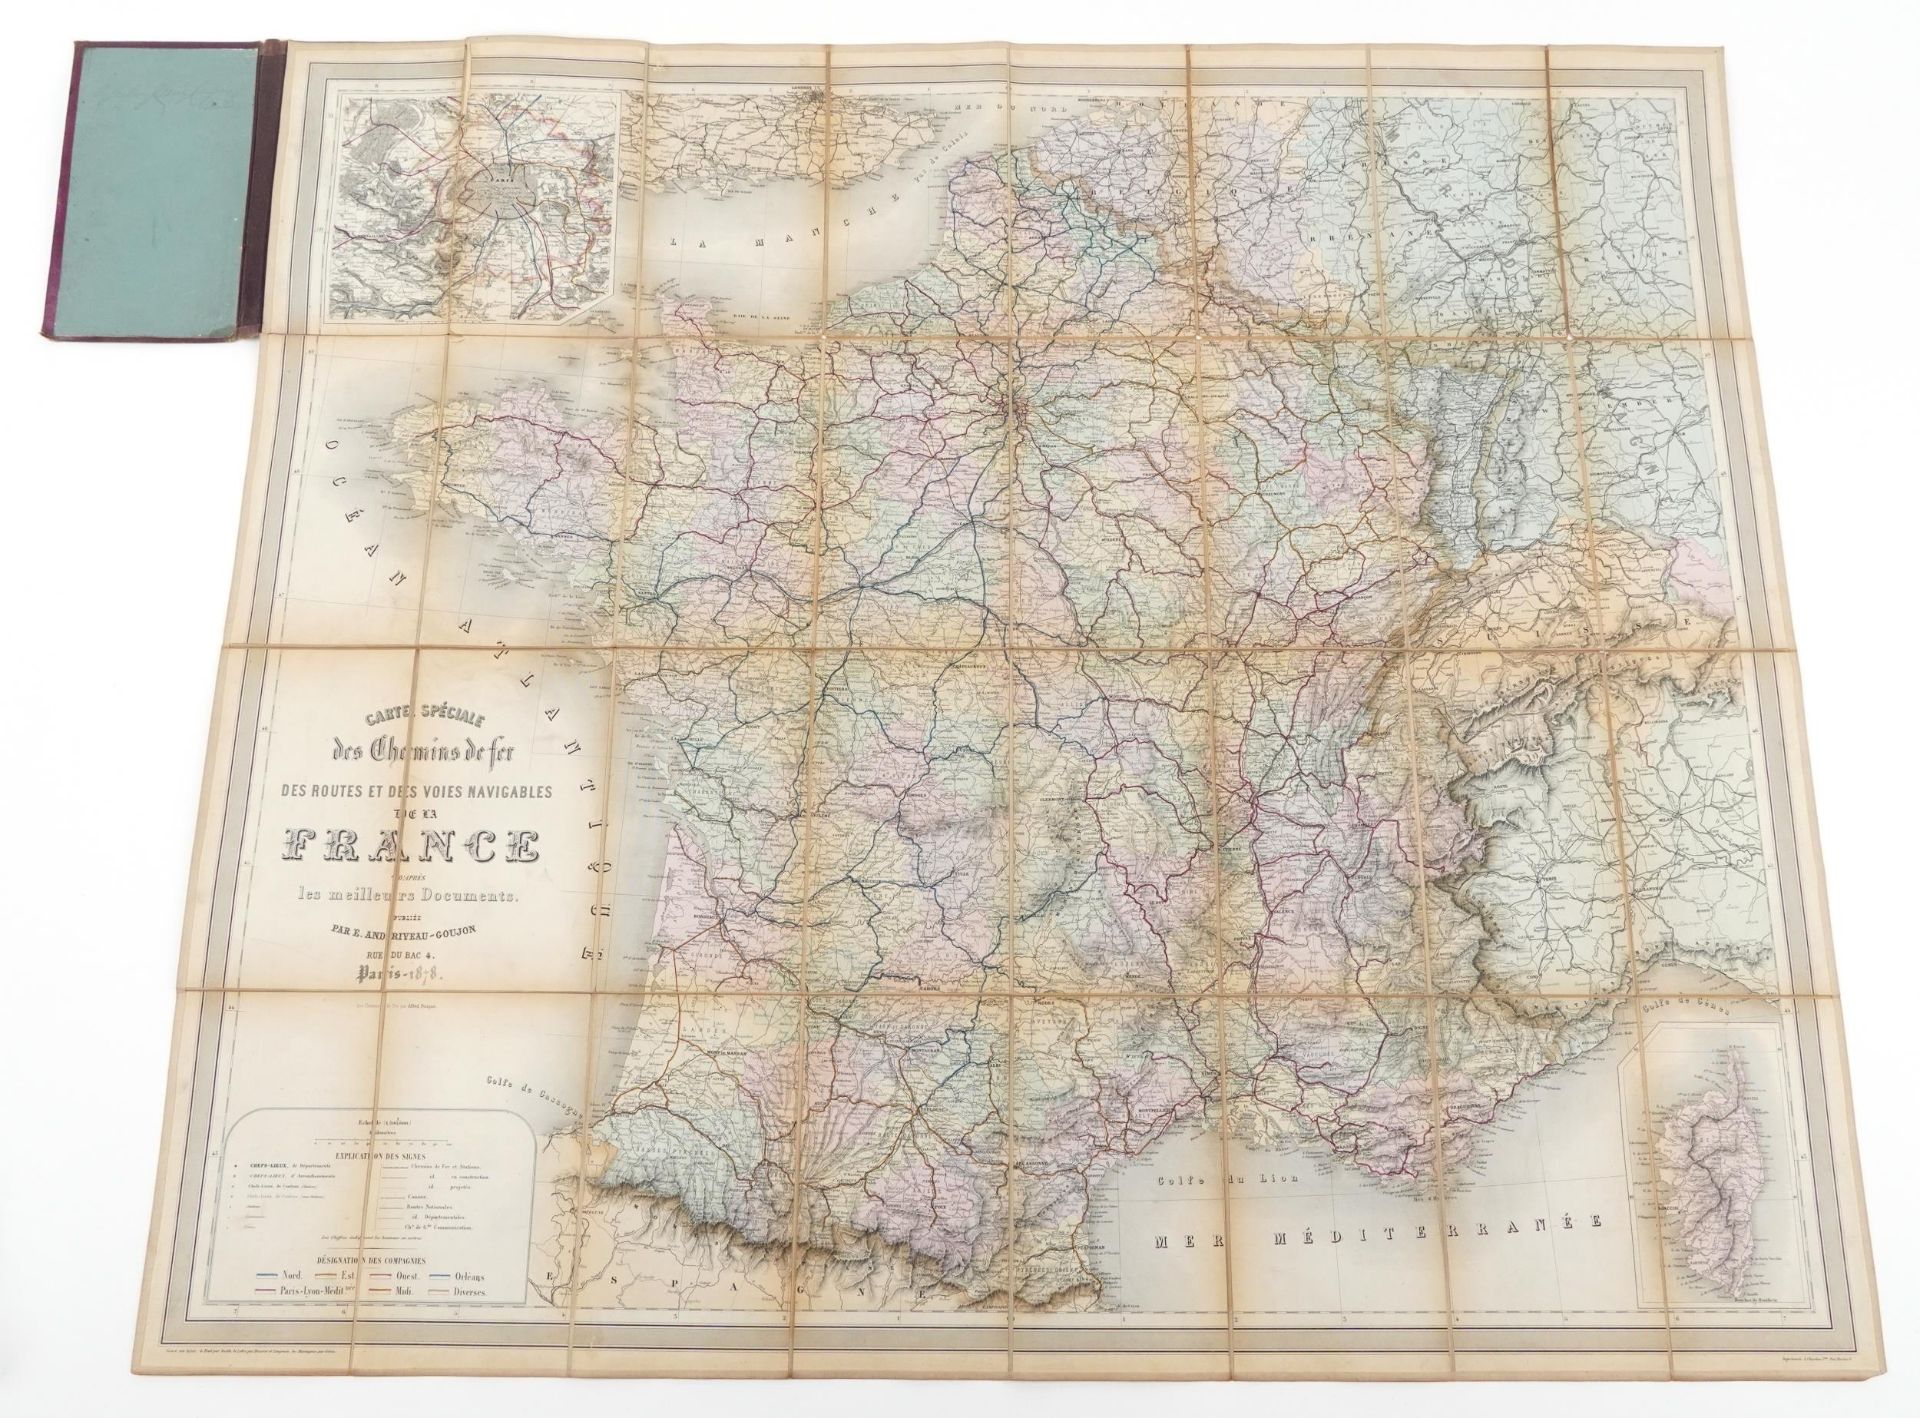 Antique canvas backed folding map of France dated 1878, 85cm x 96cm : For further information on